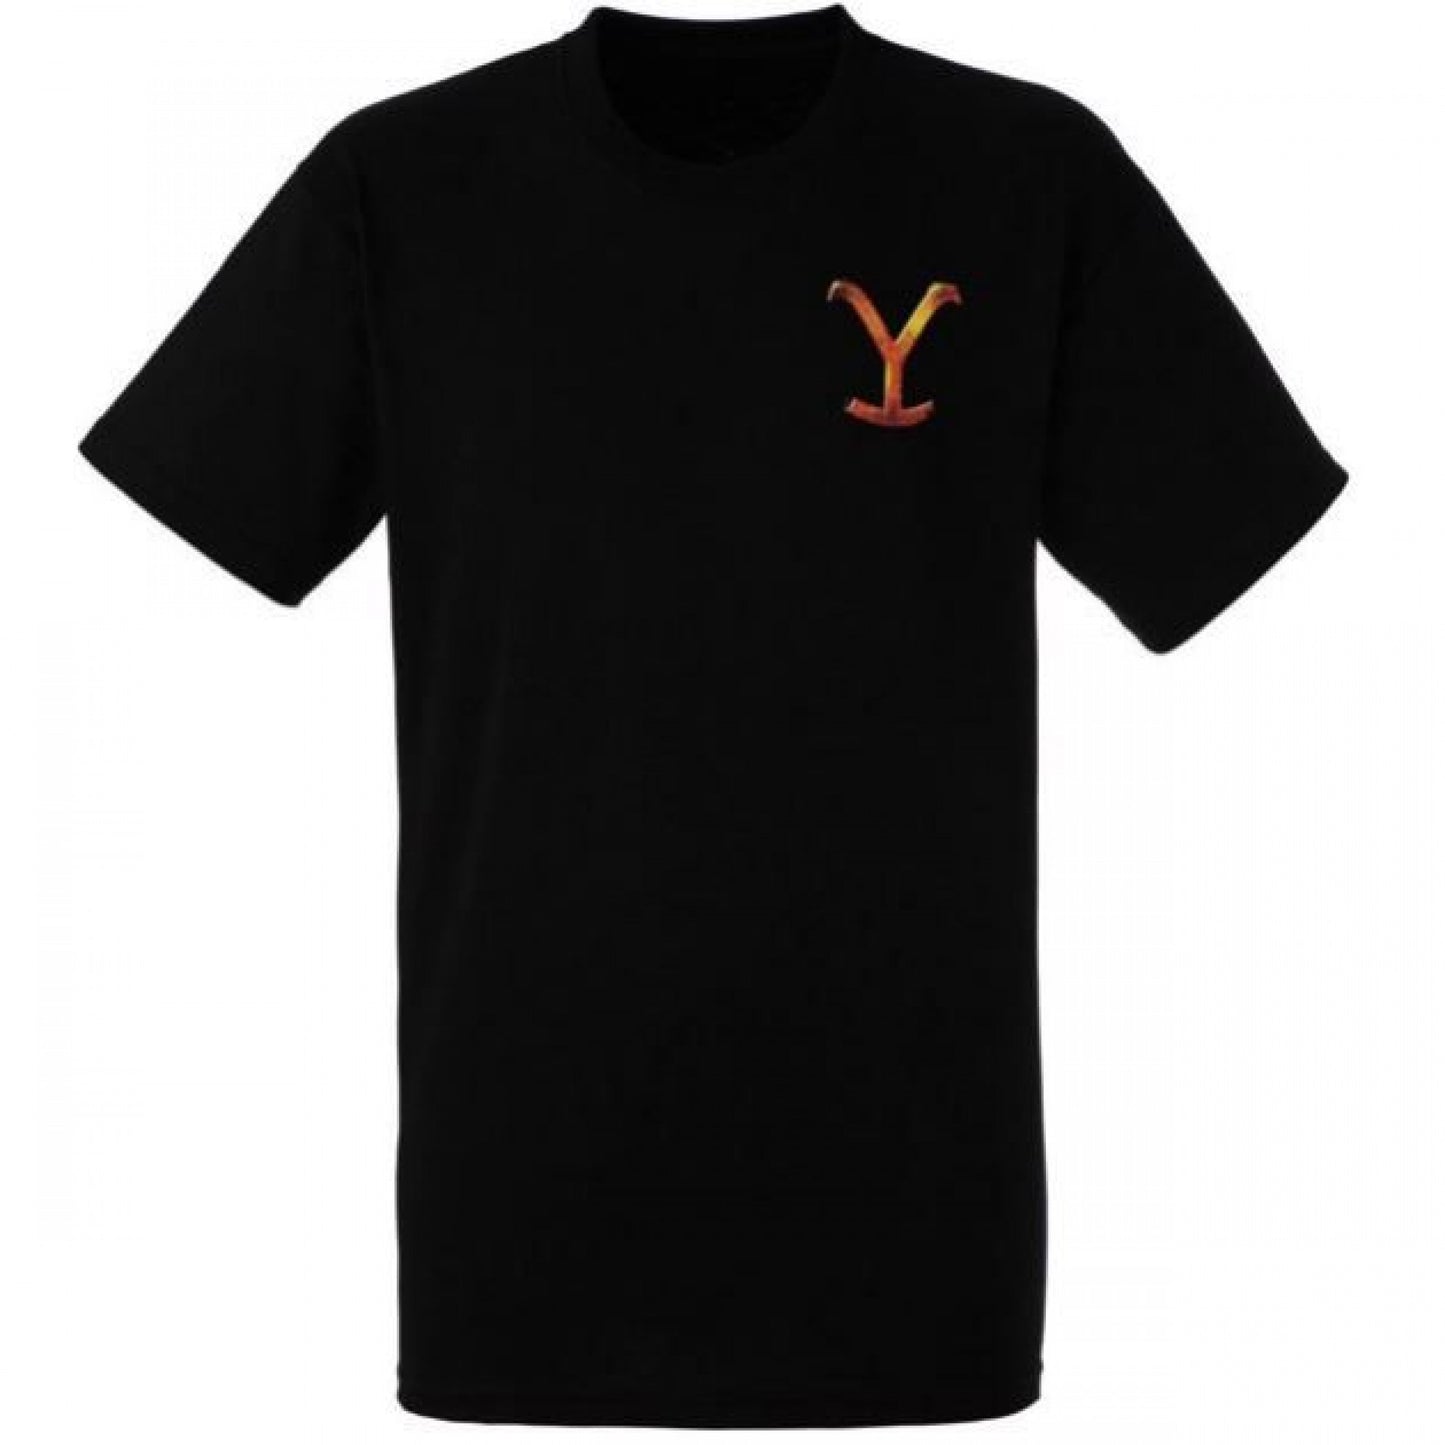 Changes Men's Yellowstone "For The Brand" Graphic T-Shirt 66-331-21